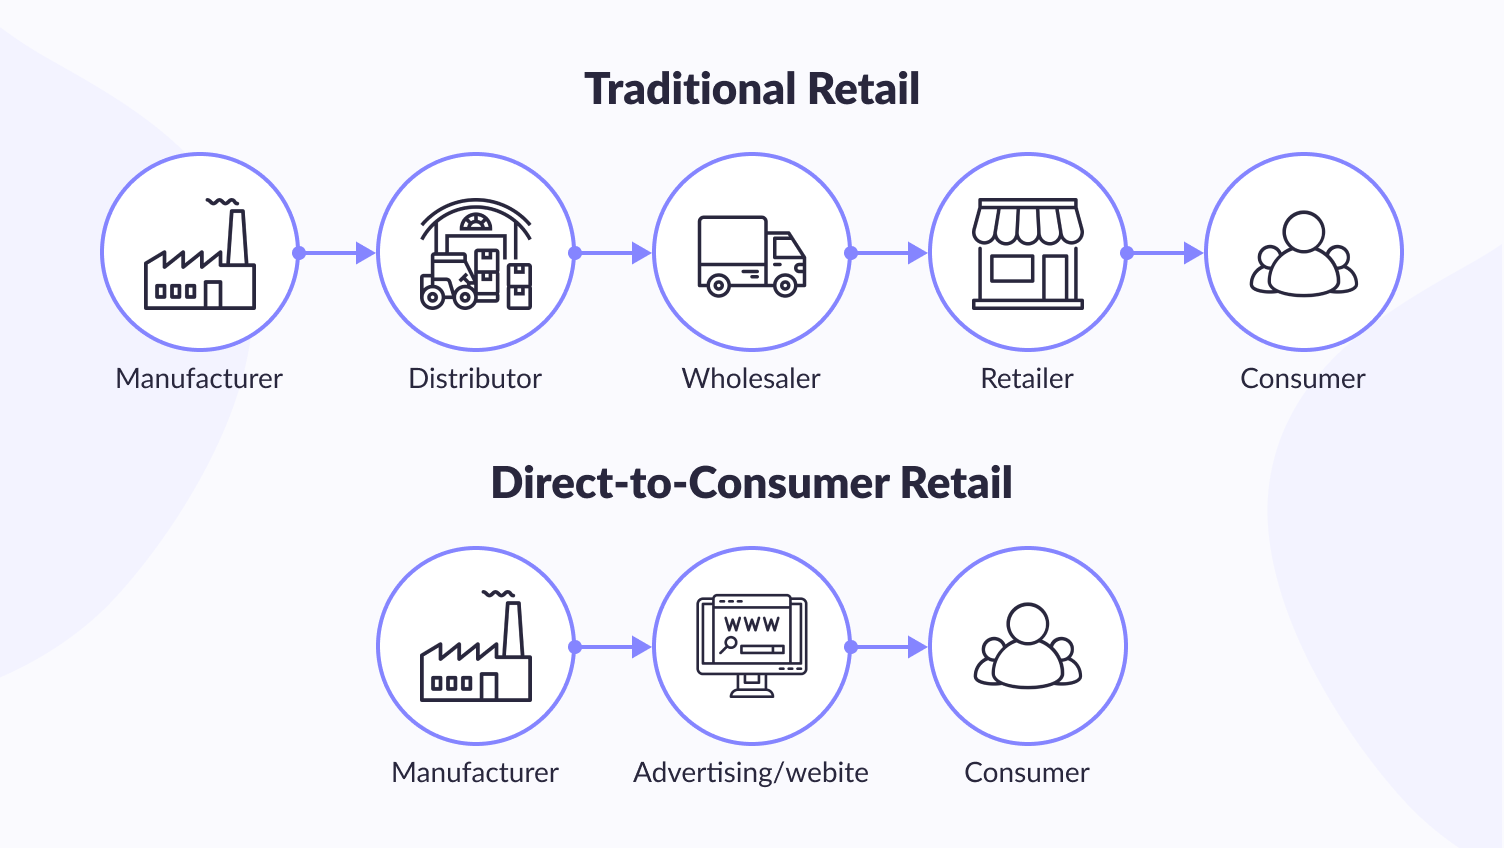 Traditional retail vs direct-to-consumer retail